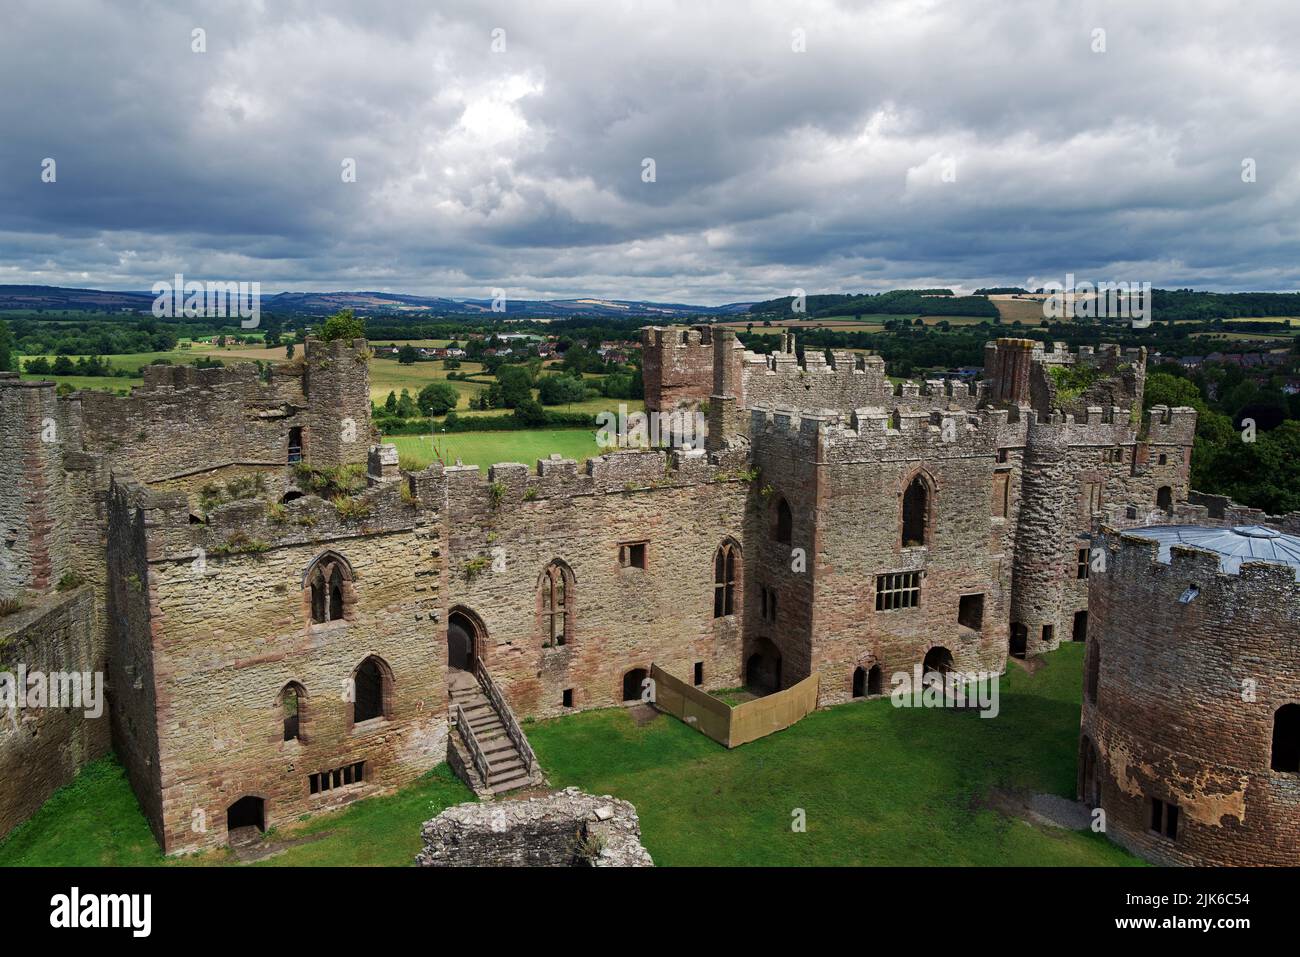 Ludlow Castle is a medieval fortification in the town of Ludlow in Shropshire. It was probably founded by Walter de Lacy around 1075. Stock Photo